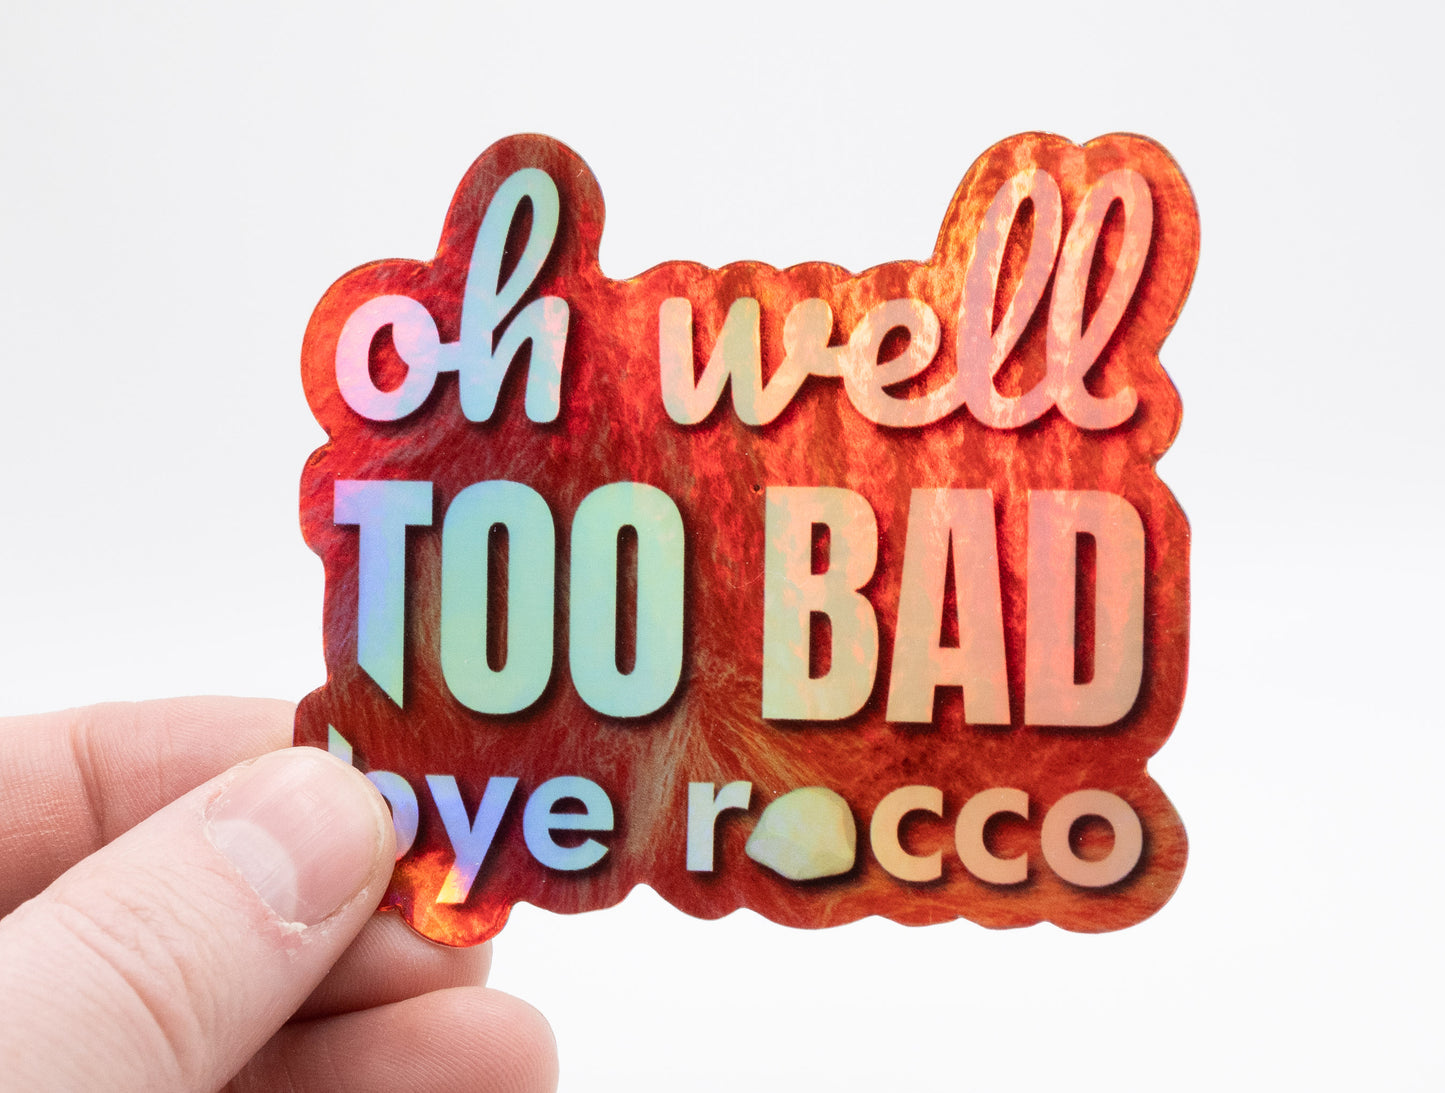 Oh Well Too Bad Bye Rocco Holographic Sticker